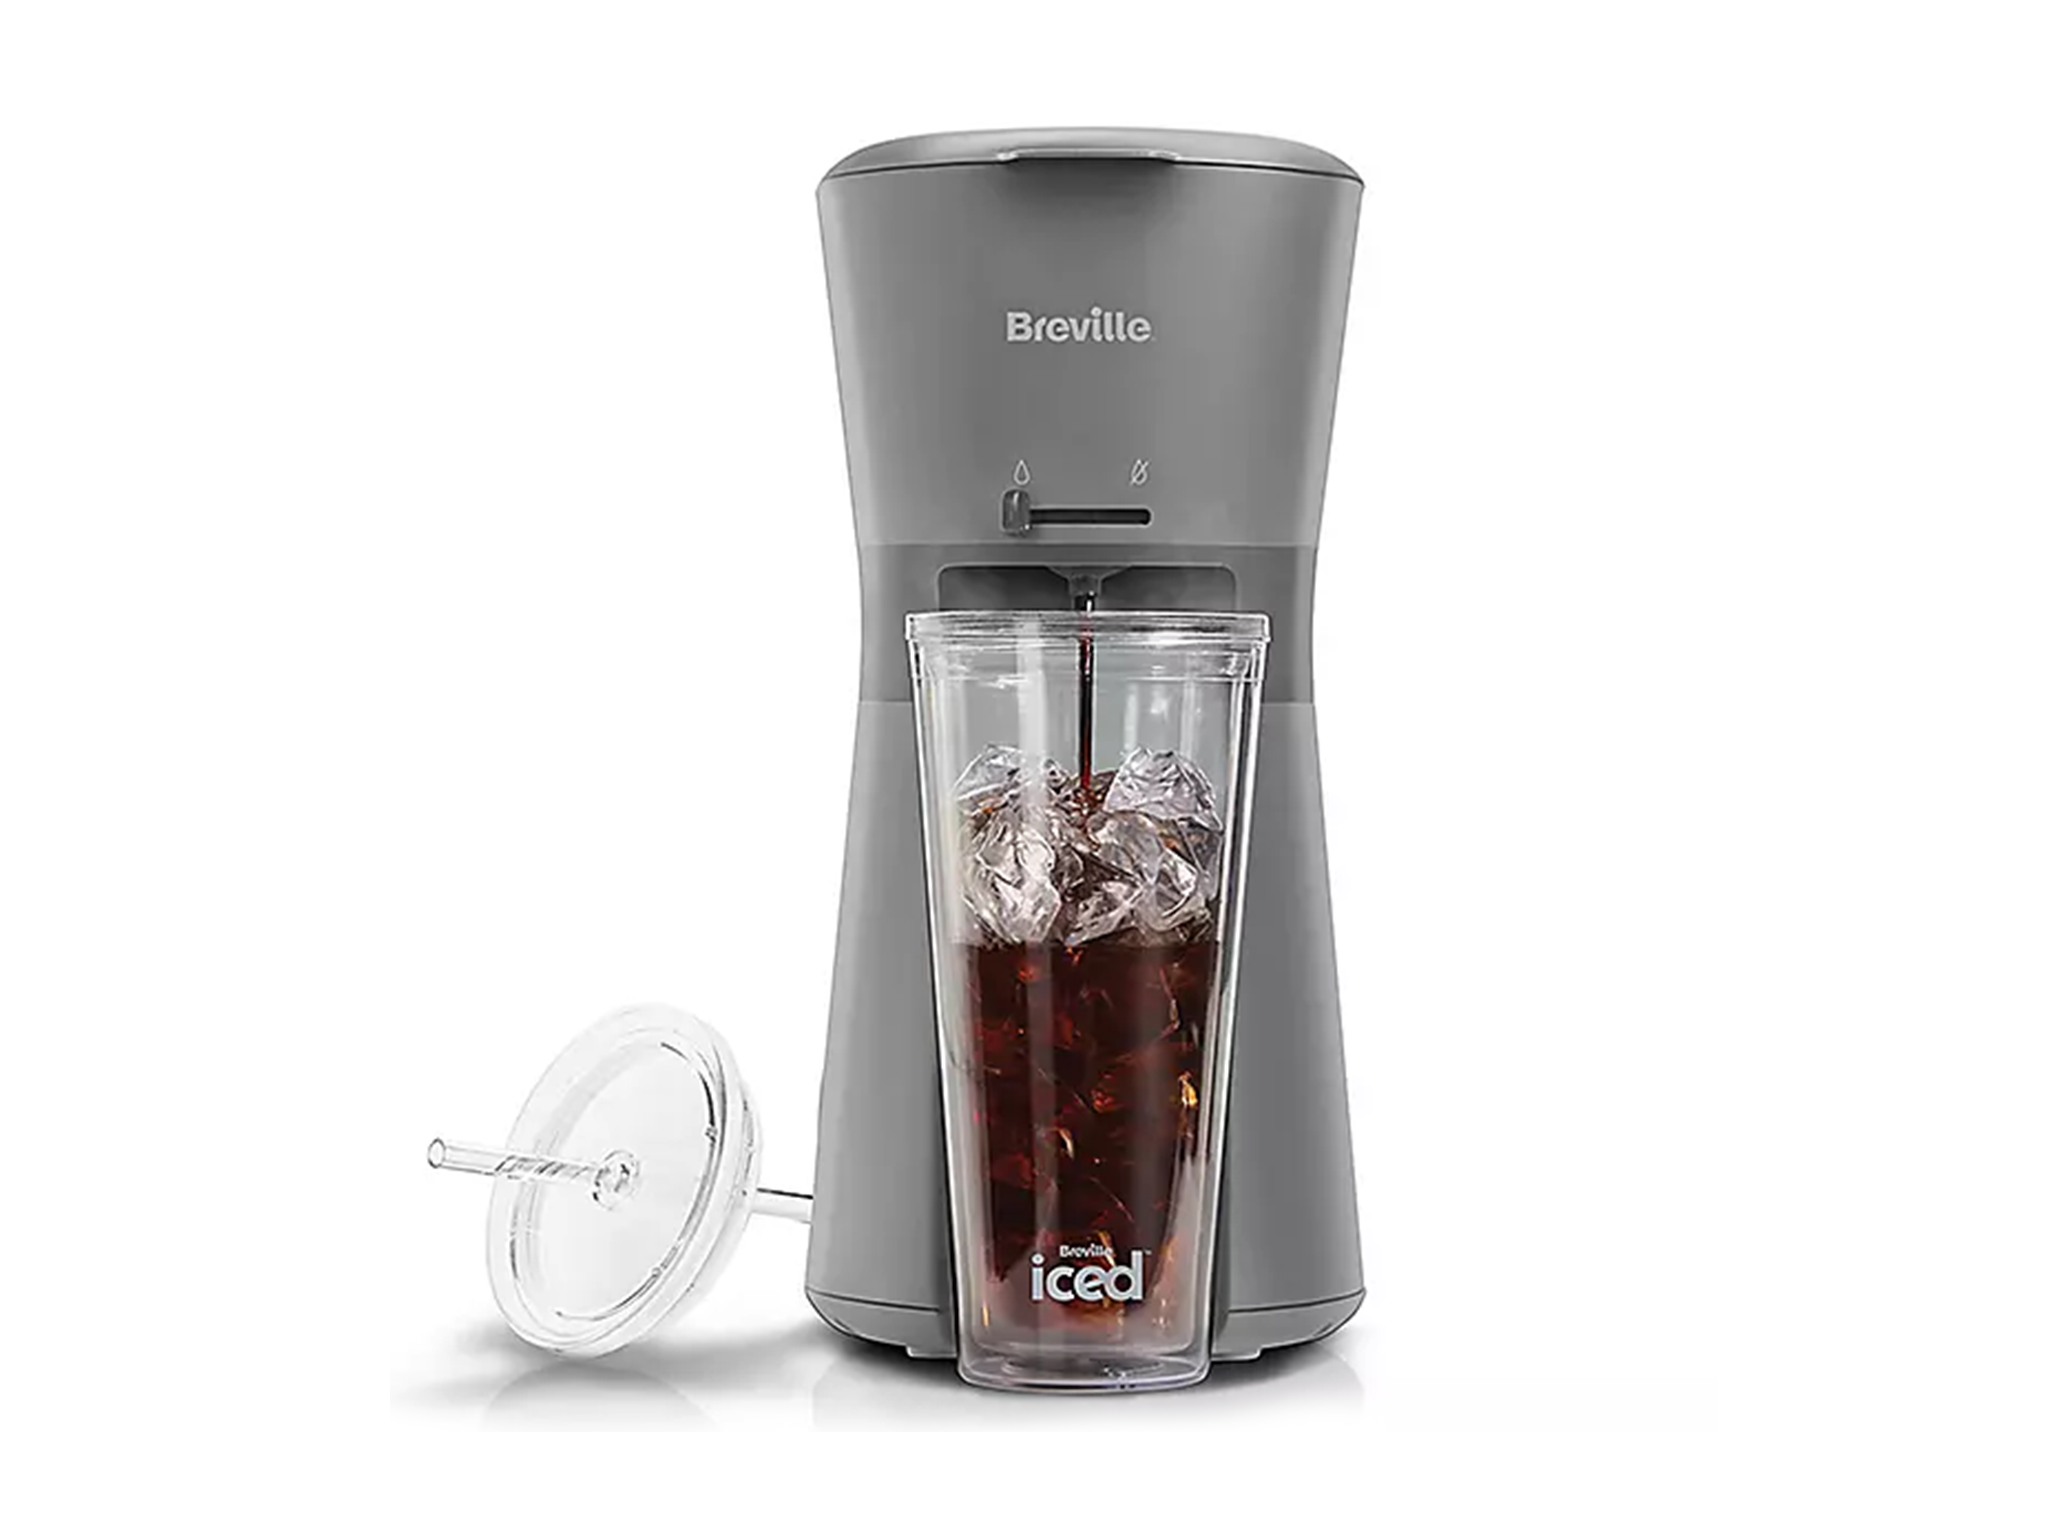 Breville iced coffee maker